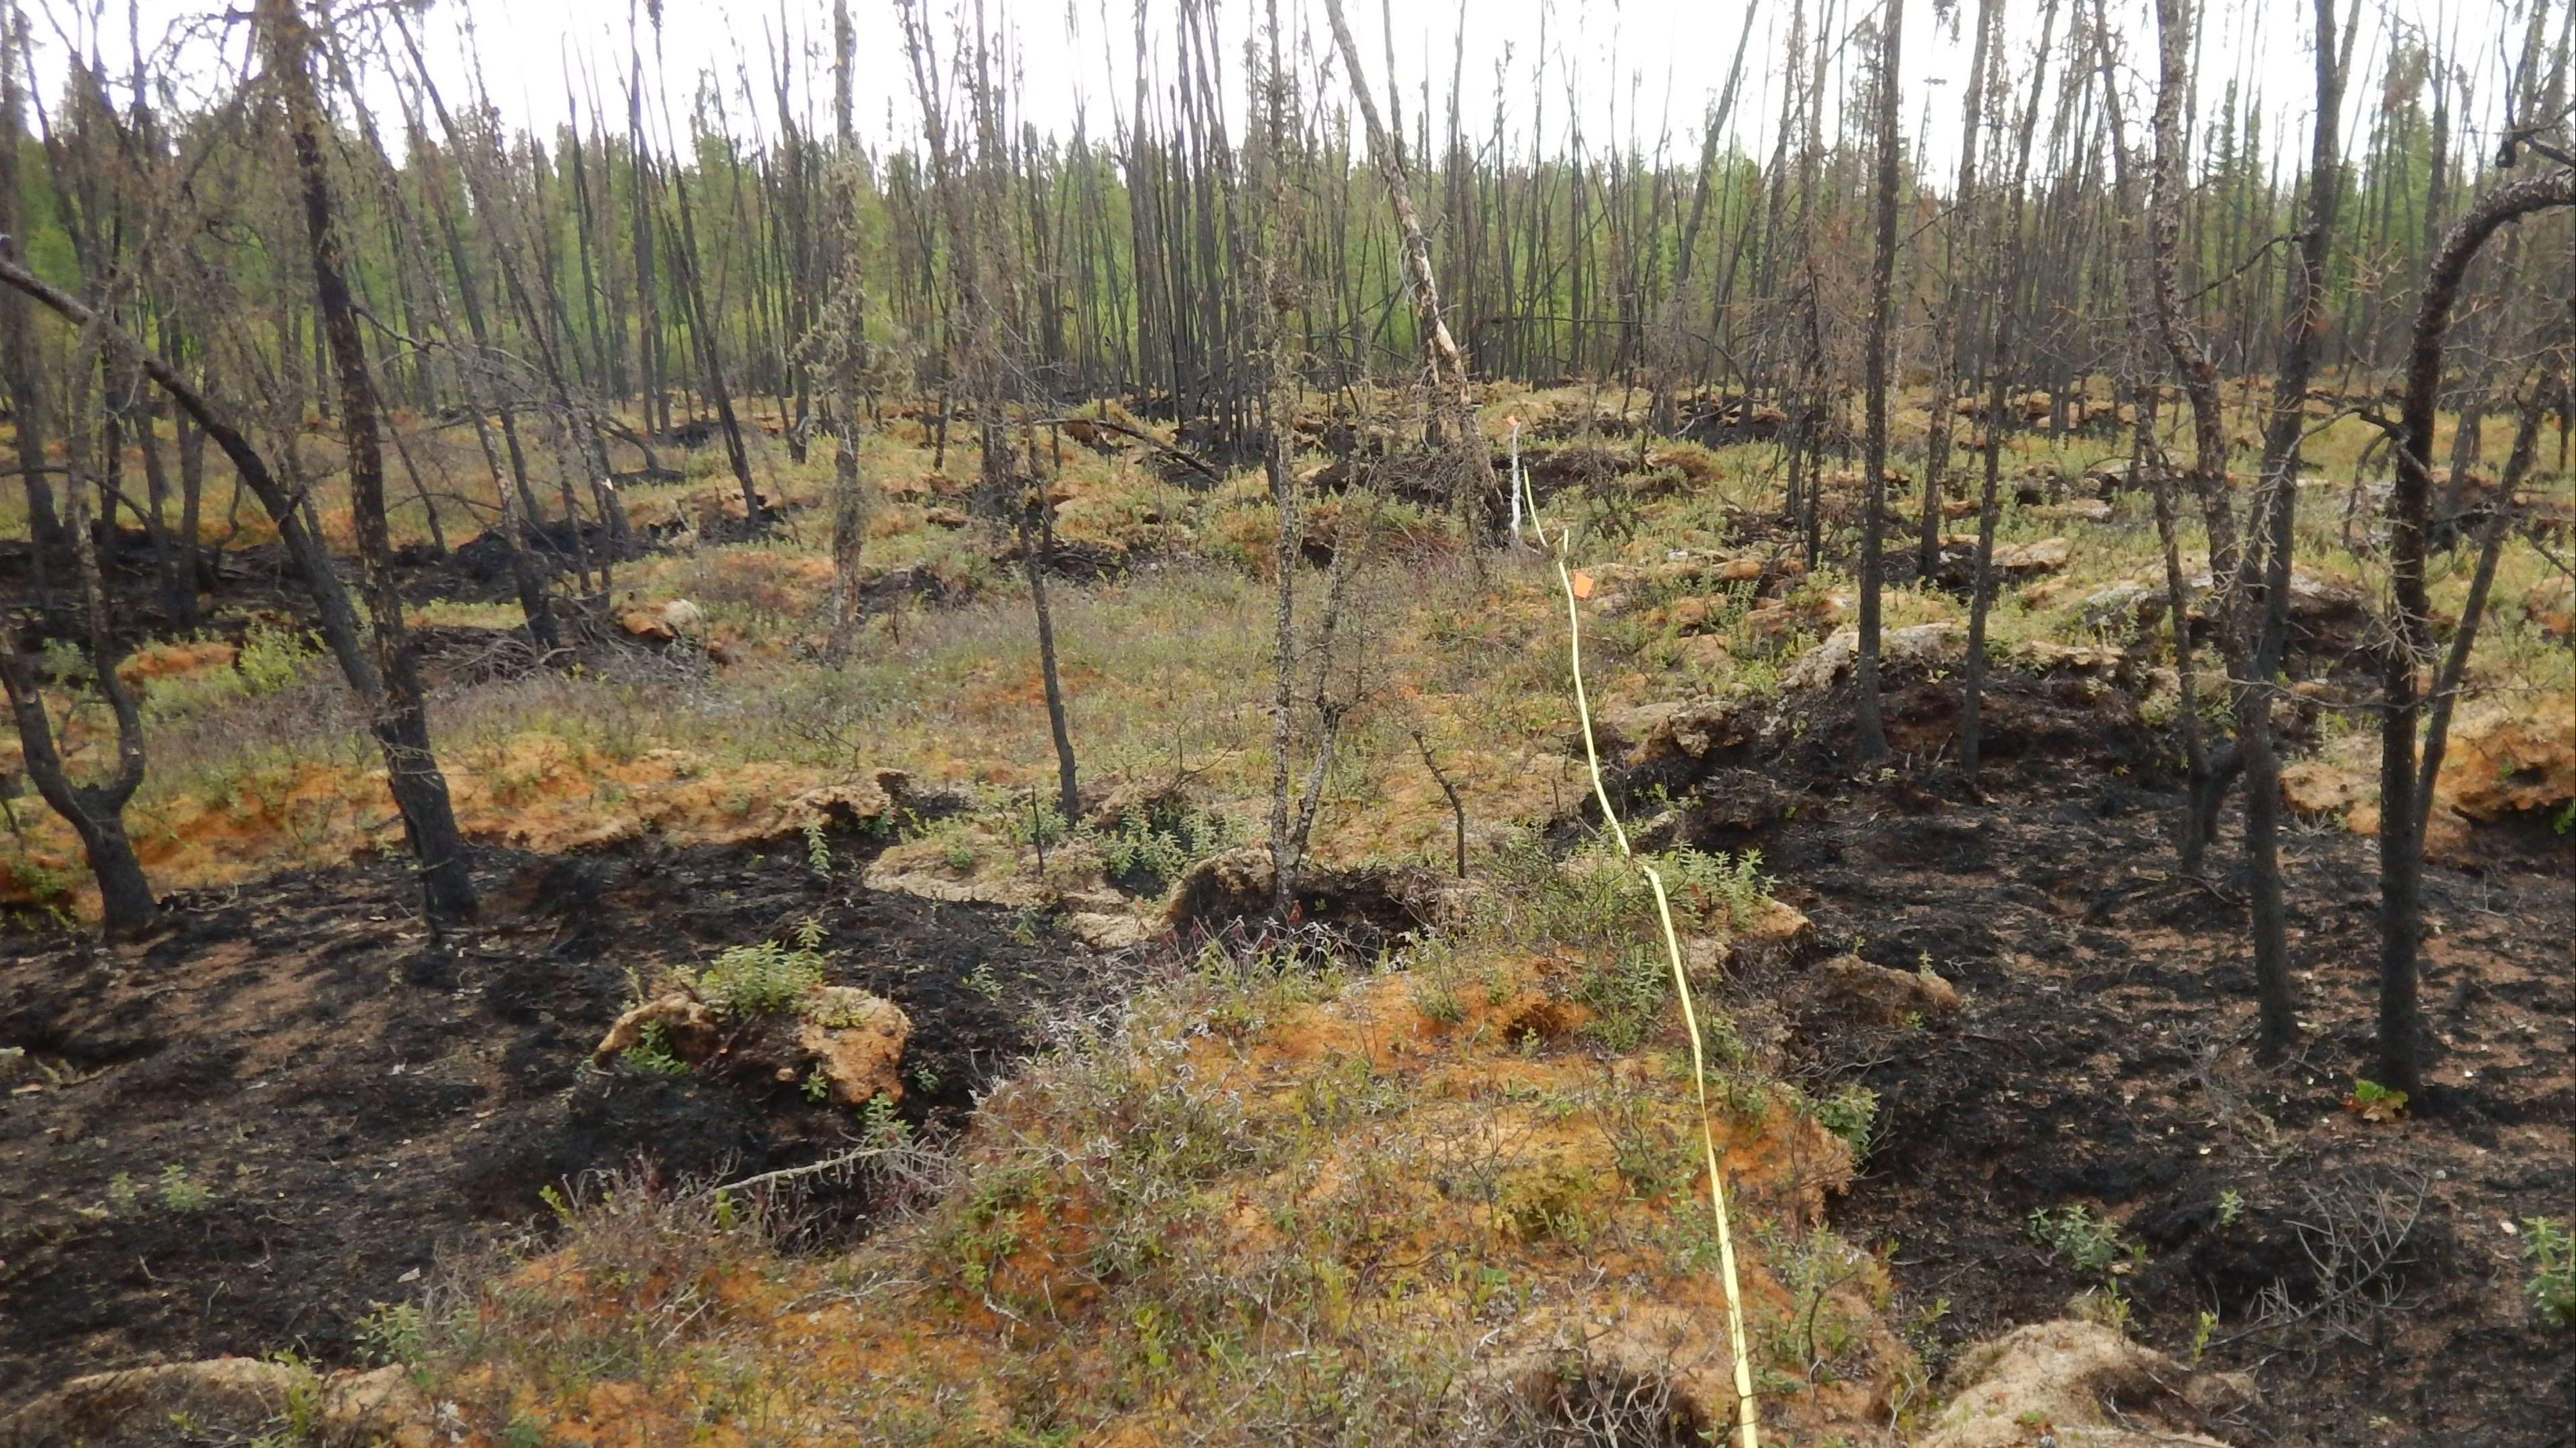 Peatlands create safe, natural havens from wildfires — but they need protection